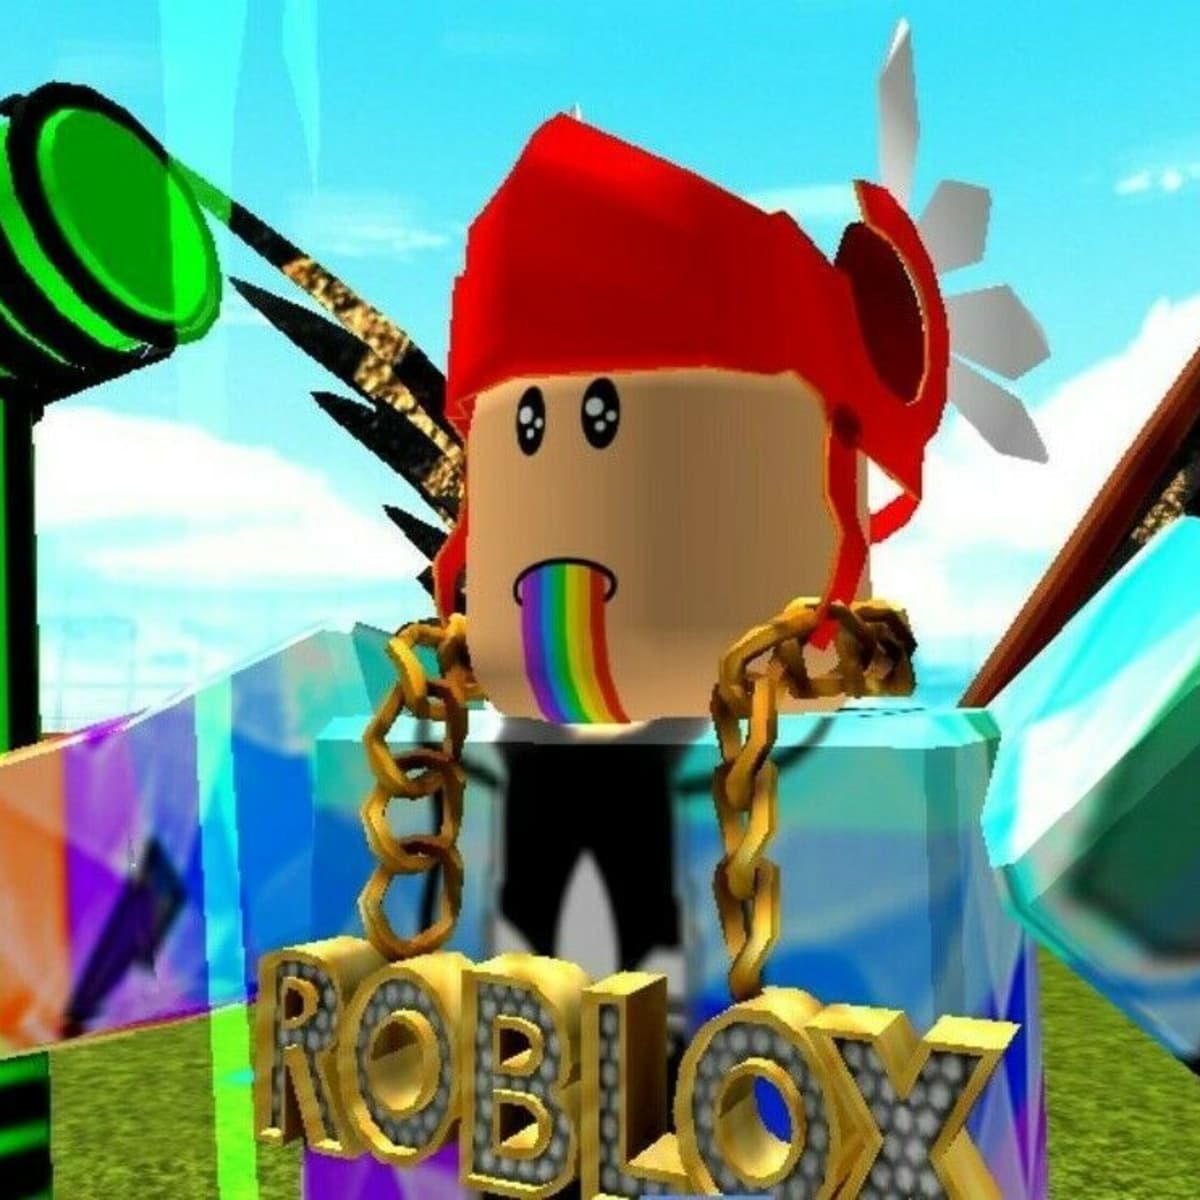 Roblox Popularity and User Base Seeing Substantial Increases in